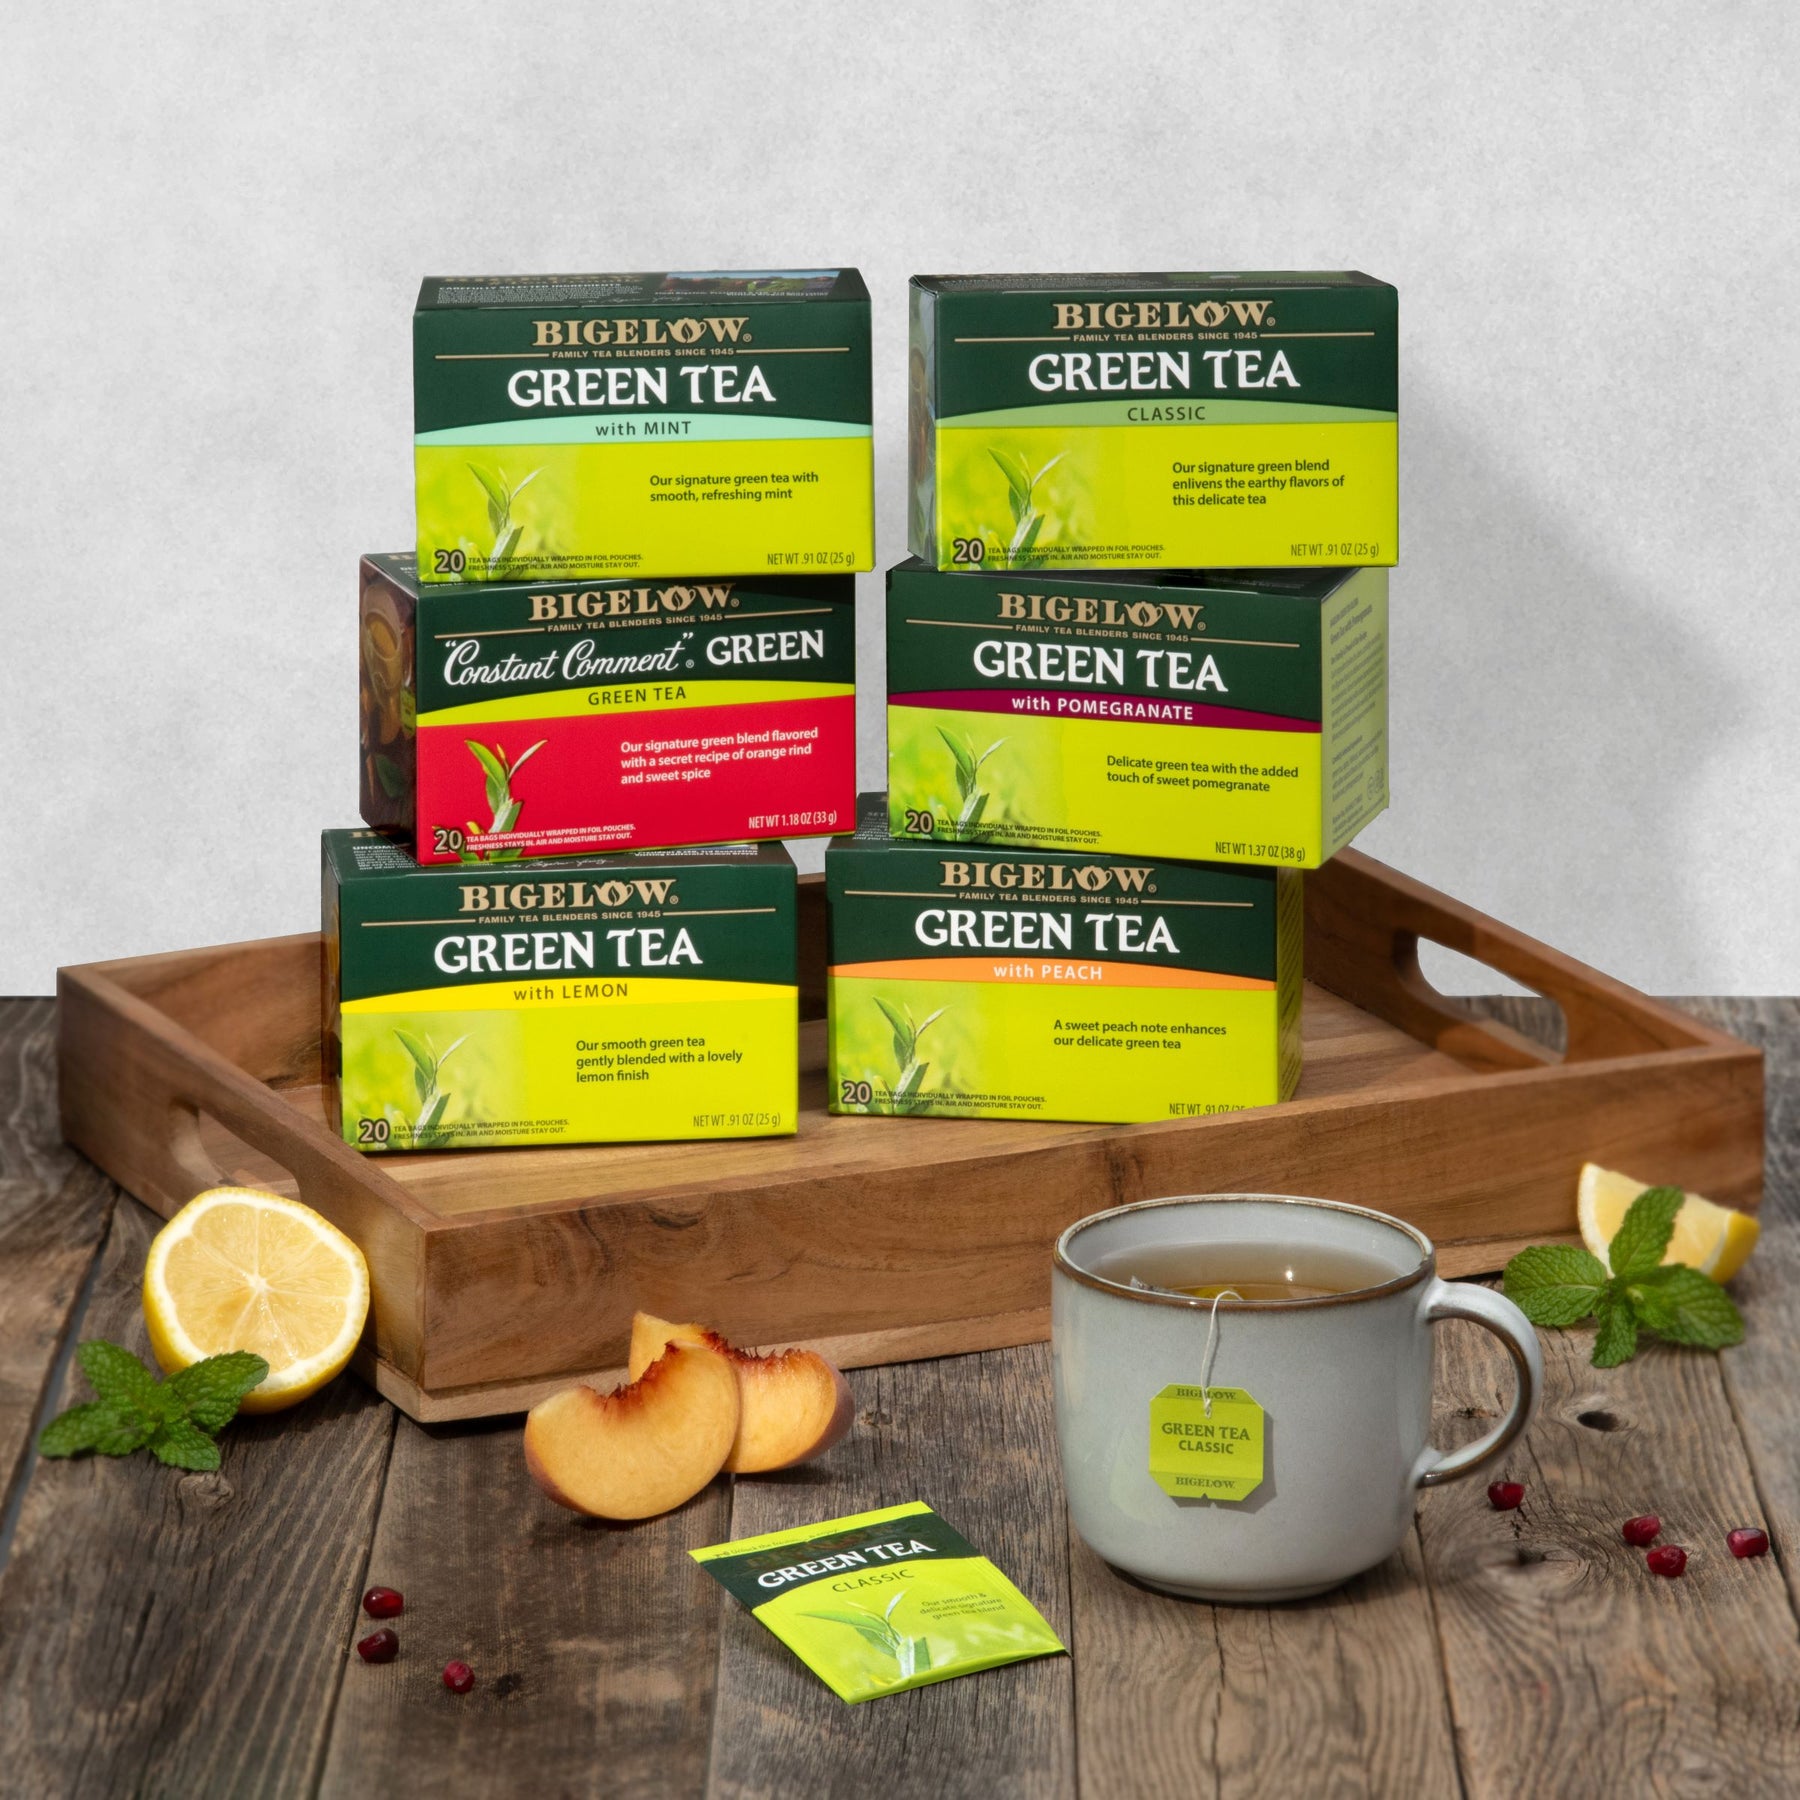 Mixed Case of 6 Bigelow Green Teas - Case of 6 boxes- total of 120 teabags  – Bigelow Tea